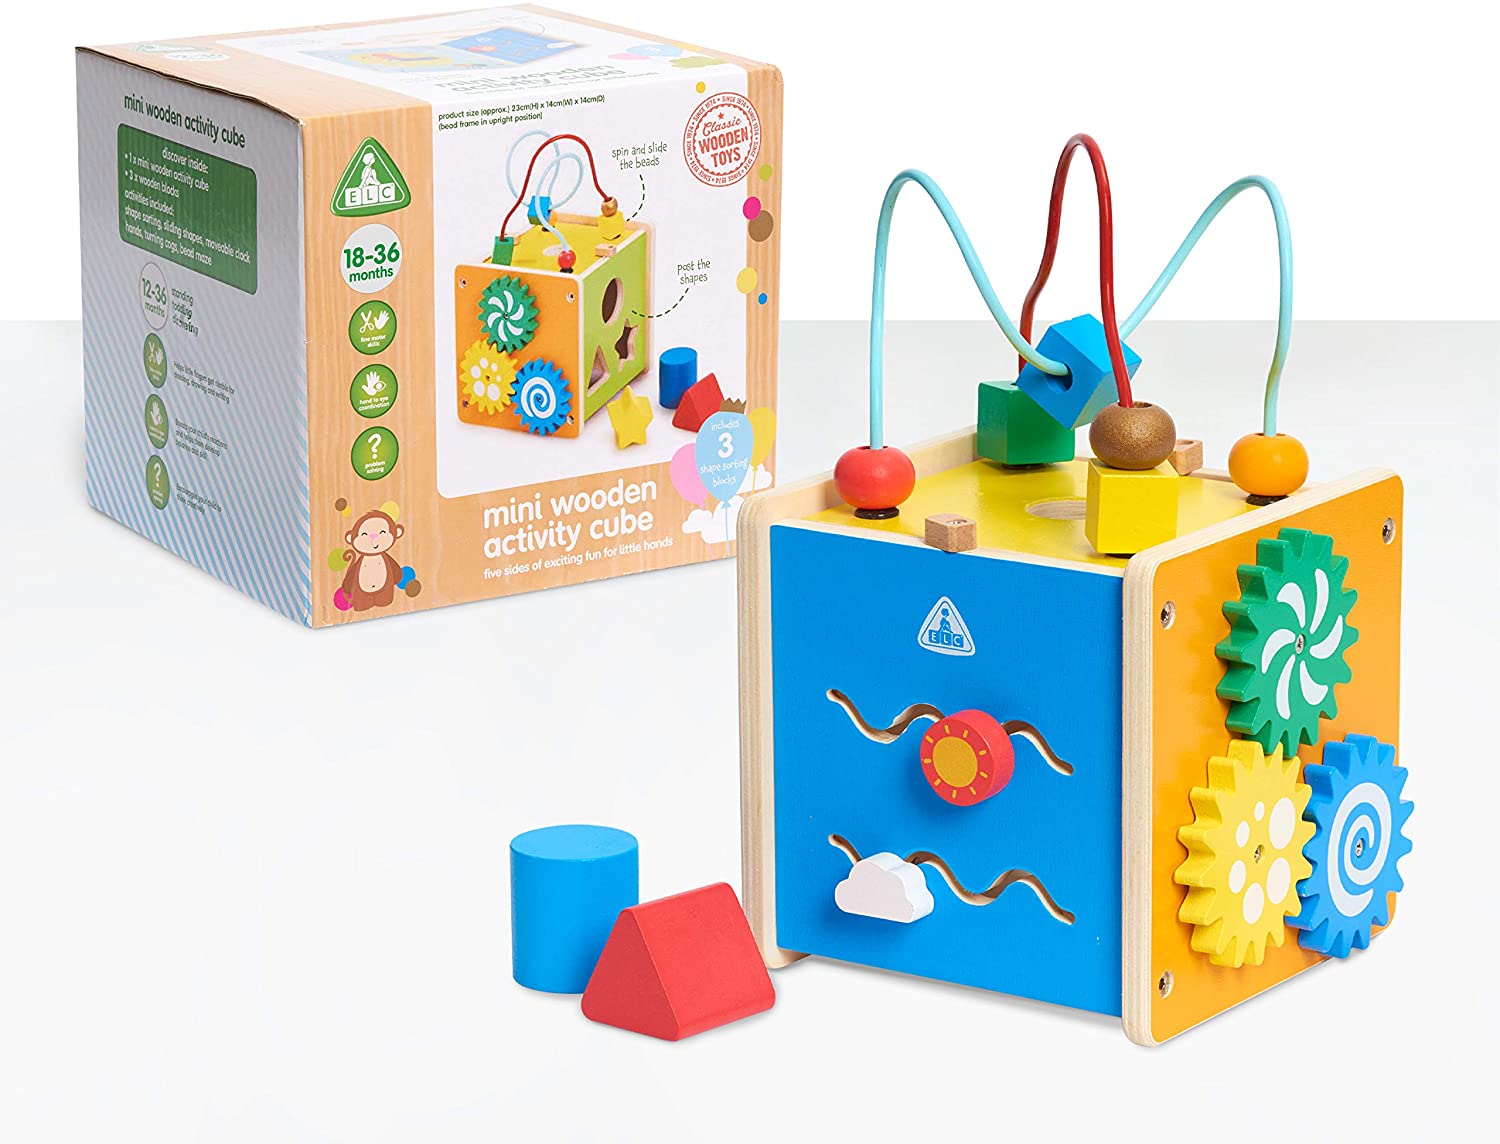 Early Learning Centre Mini Wooden Activity Cube Toy $6.39